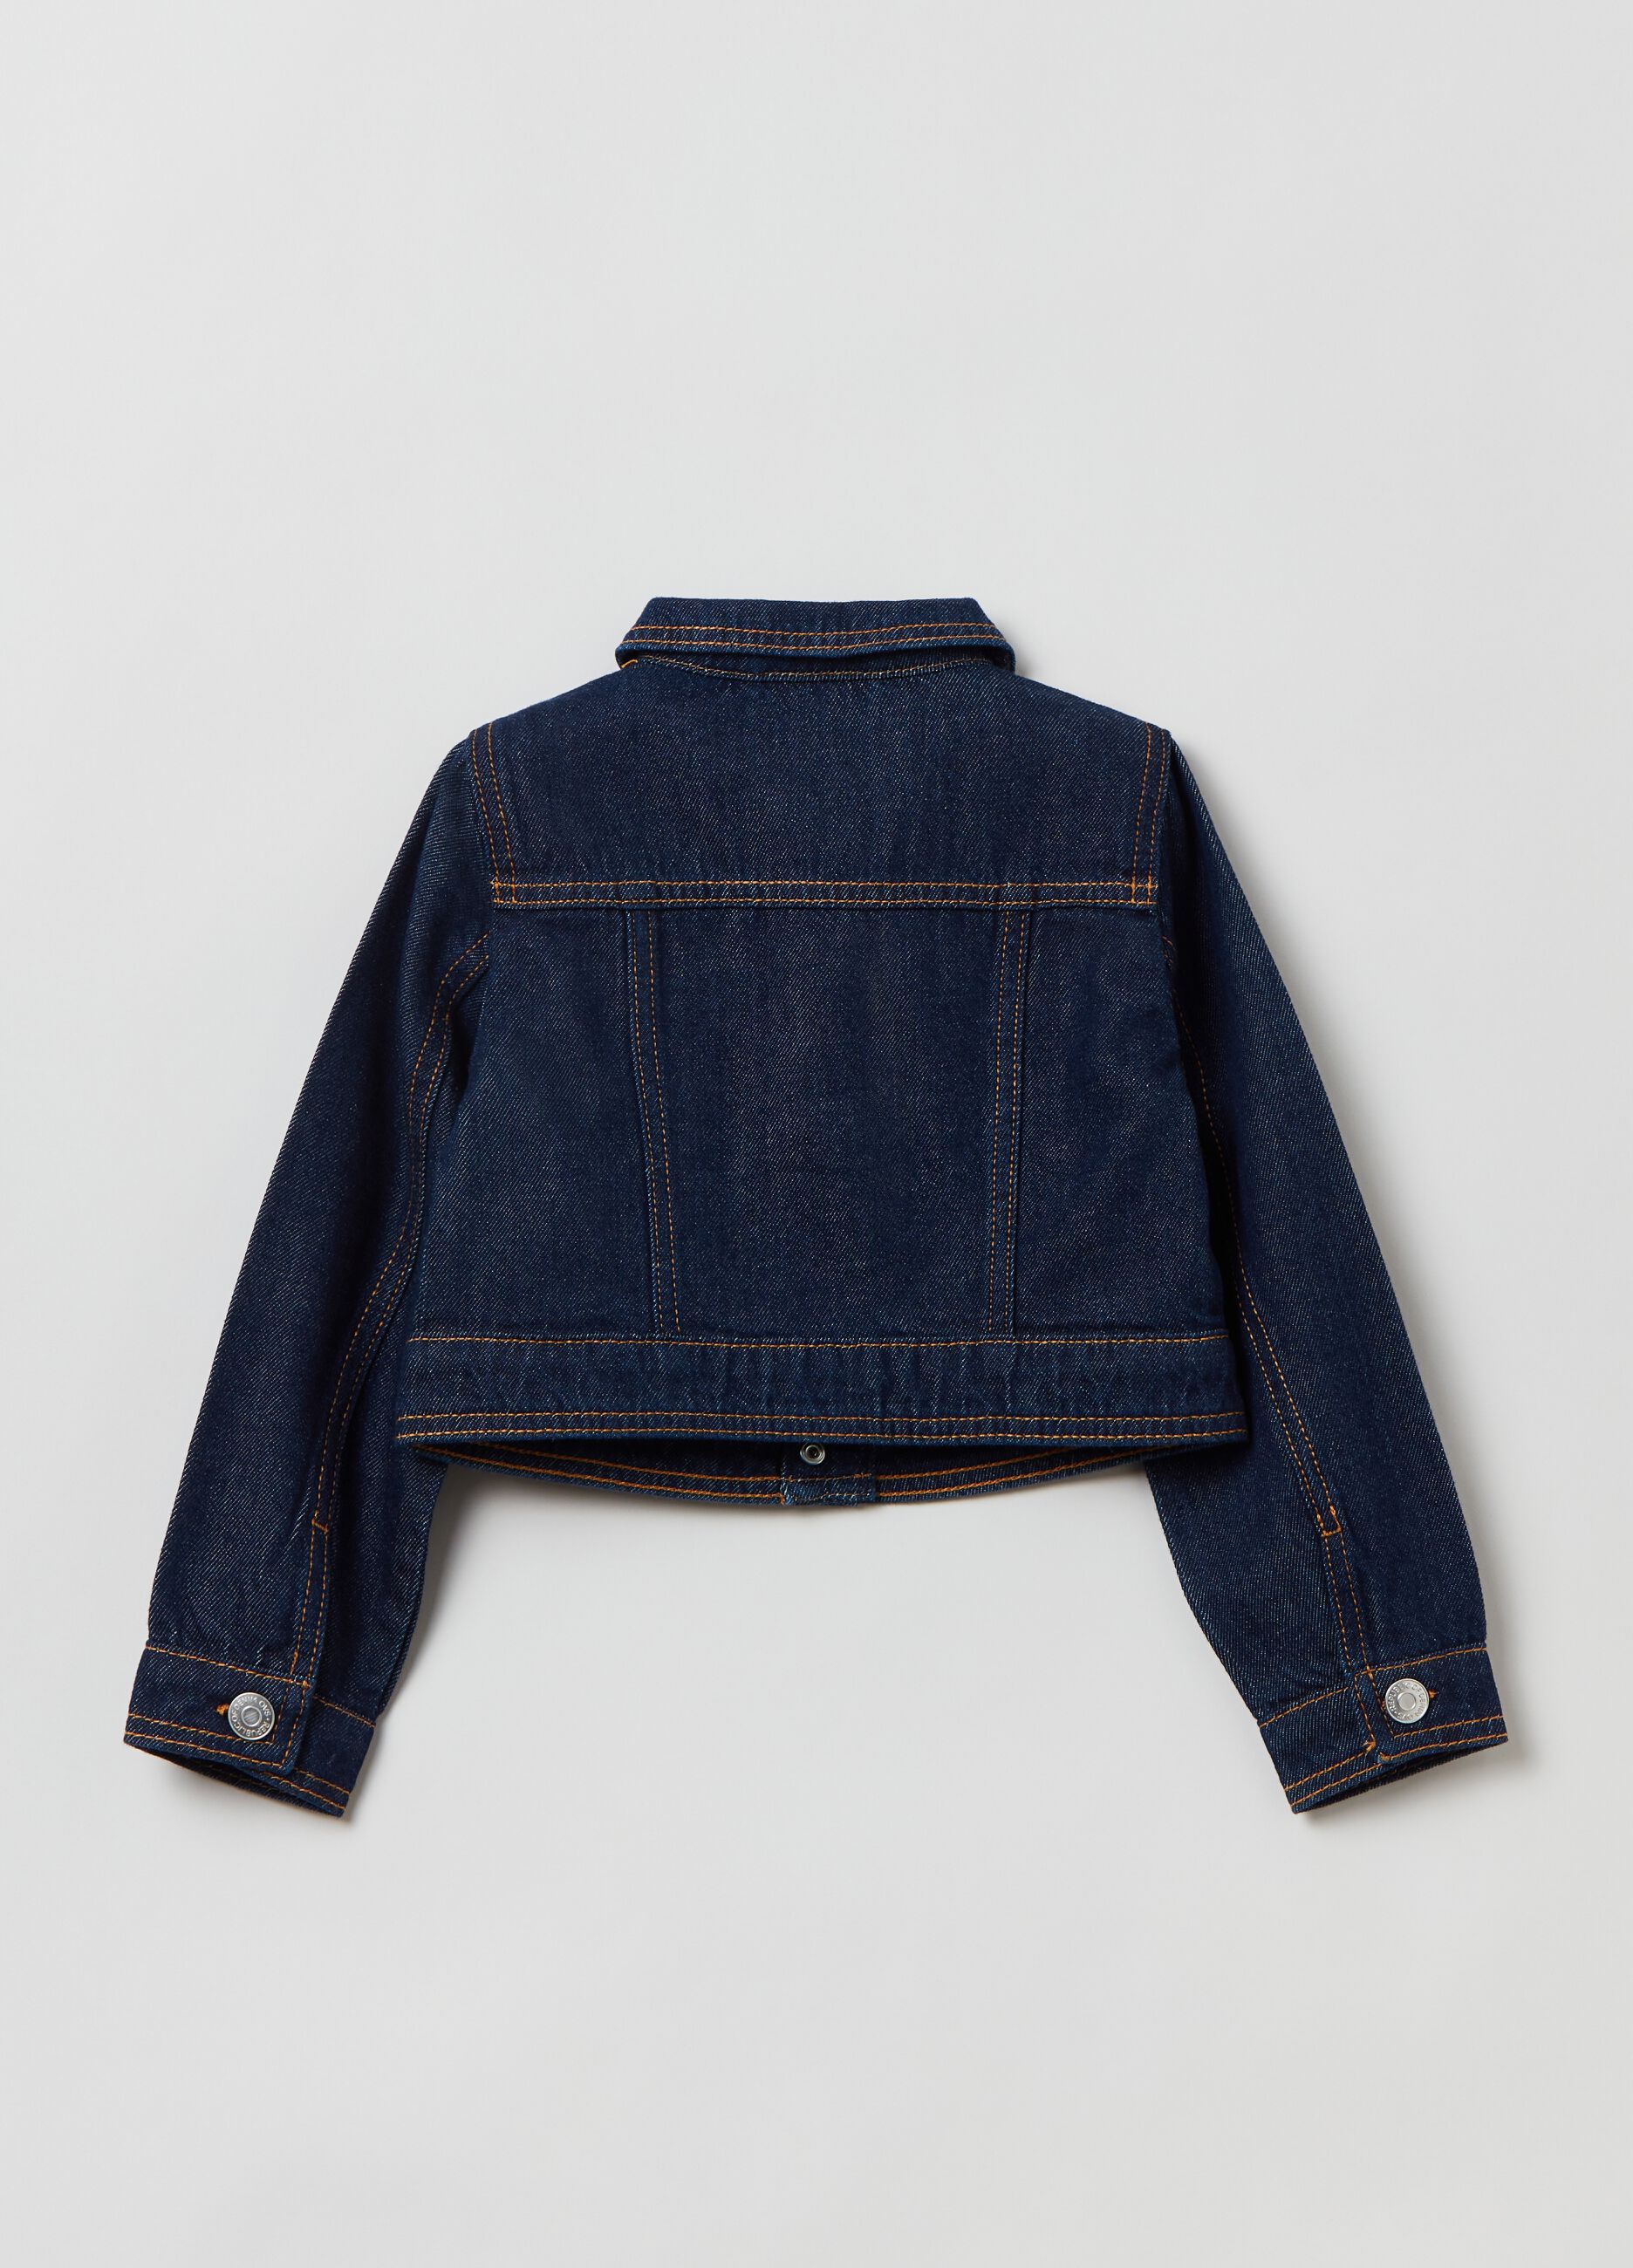 Denim jacket with rounded collar